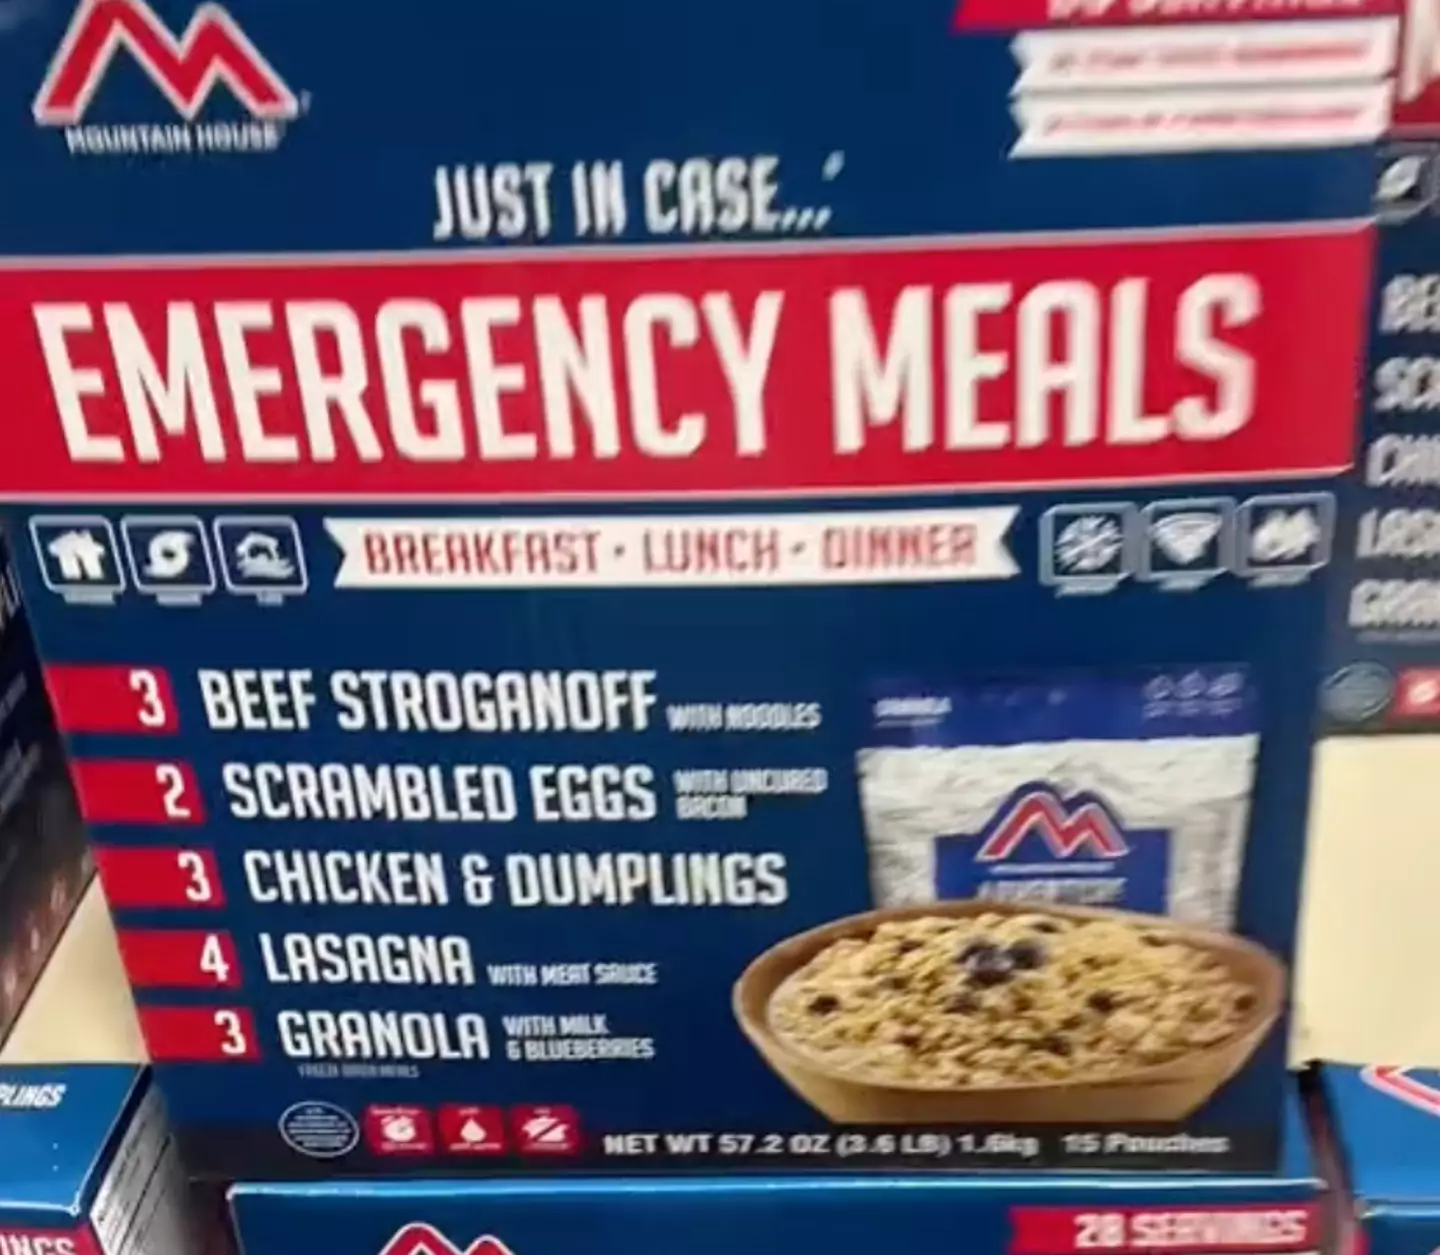 The emergency meal kits come with hundreds of servings.